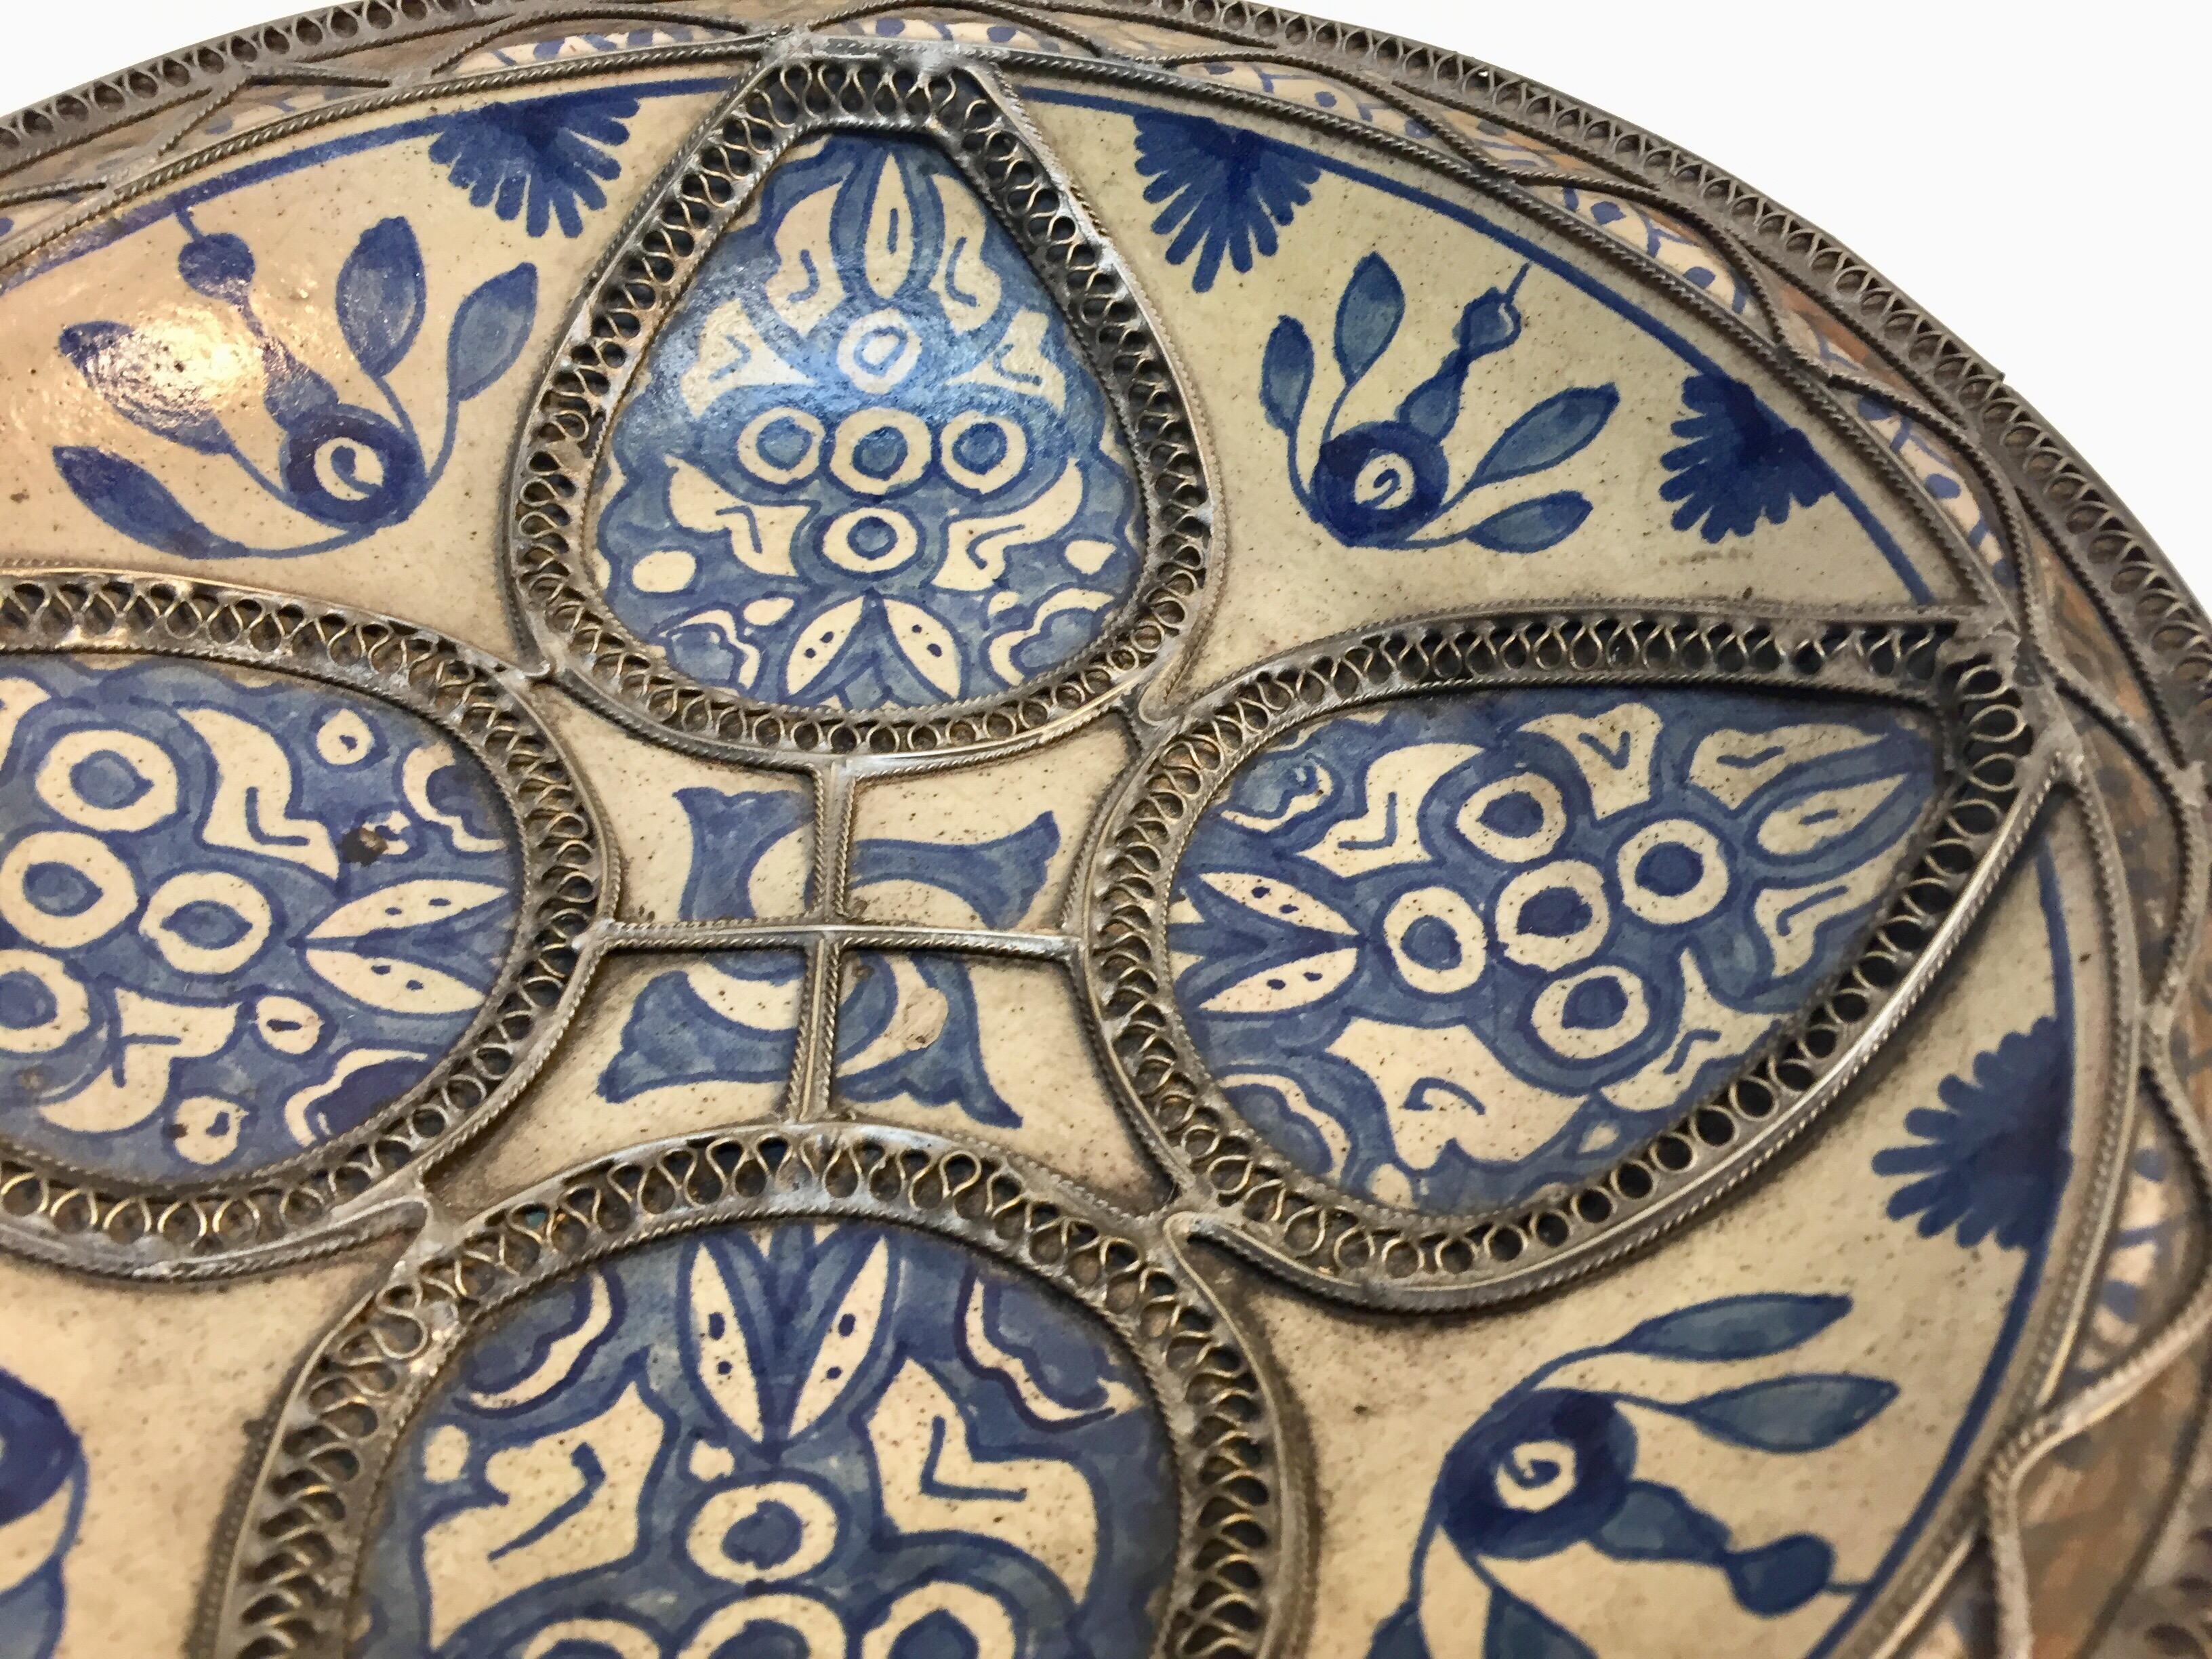 Hand-Crafted Moroccan Ceramic Plate Adorned with Silver Filigree from Fez